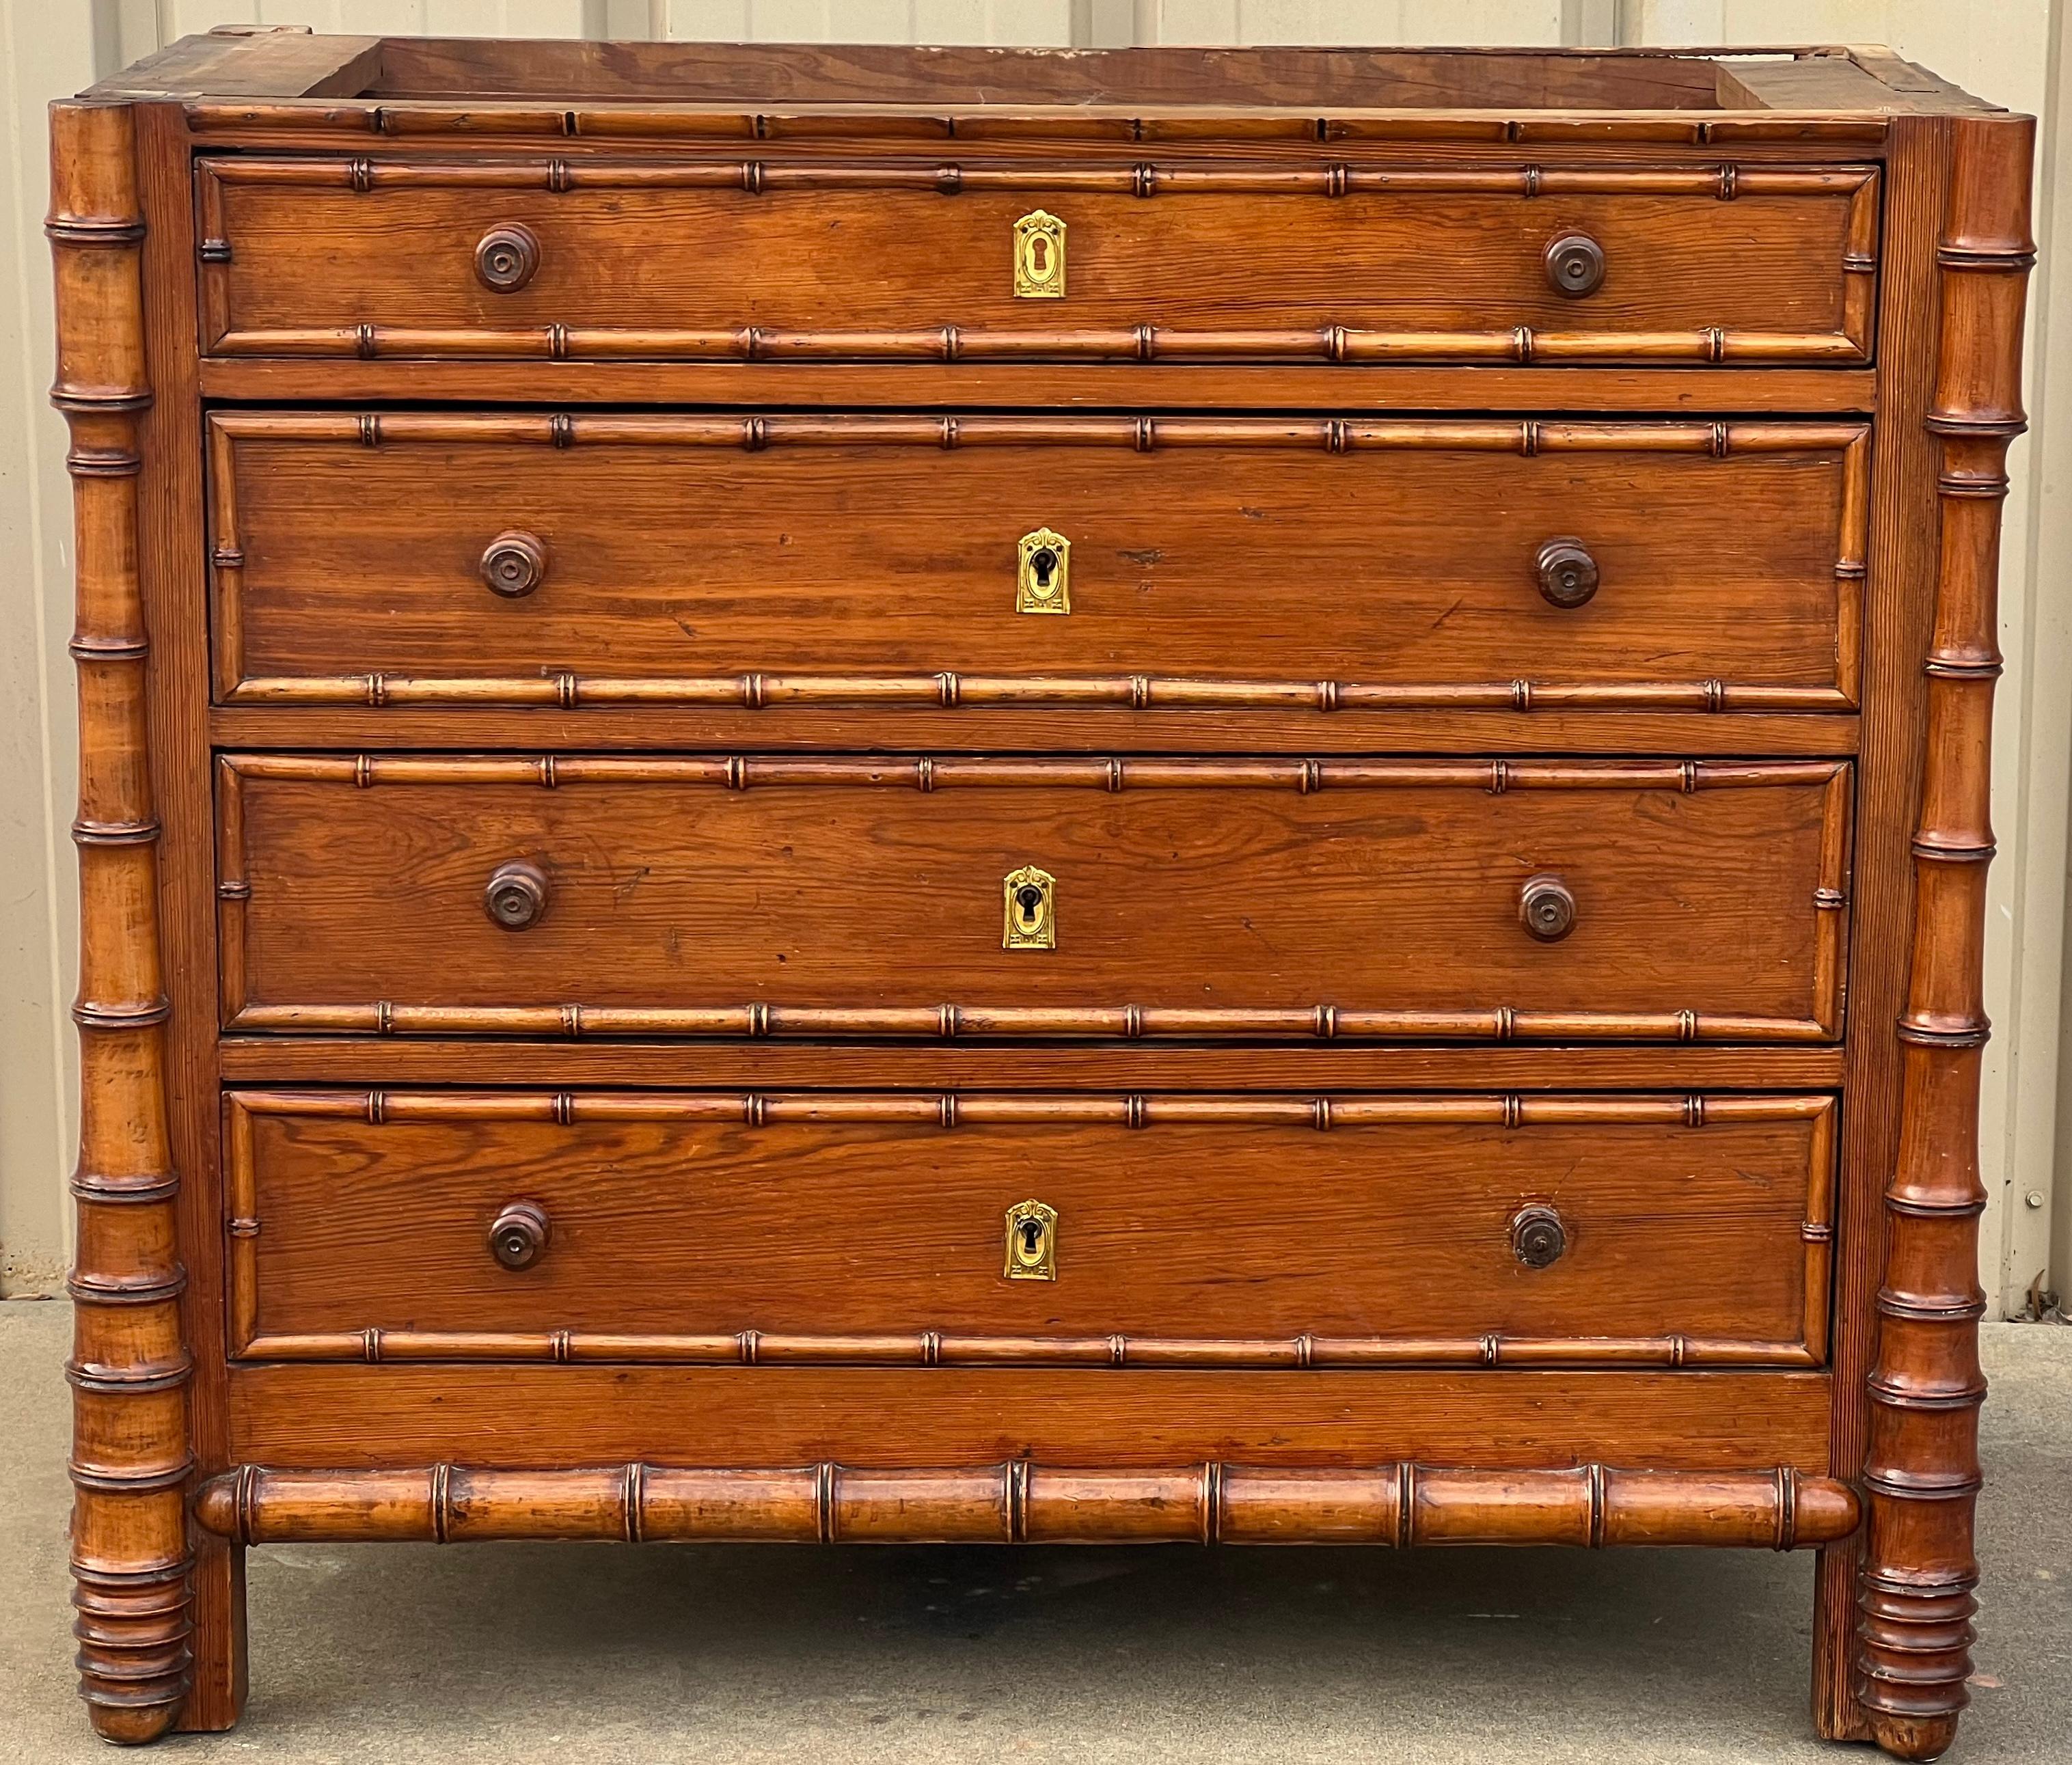 20th Century 19th-C. French Aesthetic Movement Faux Bamboo Pine & Marble Chest / Commode For Sale